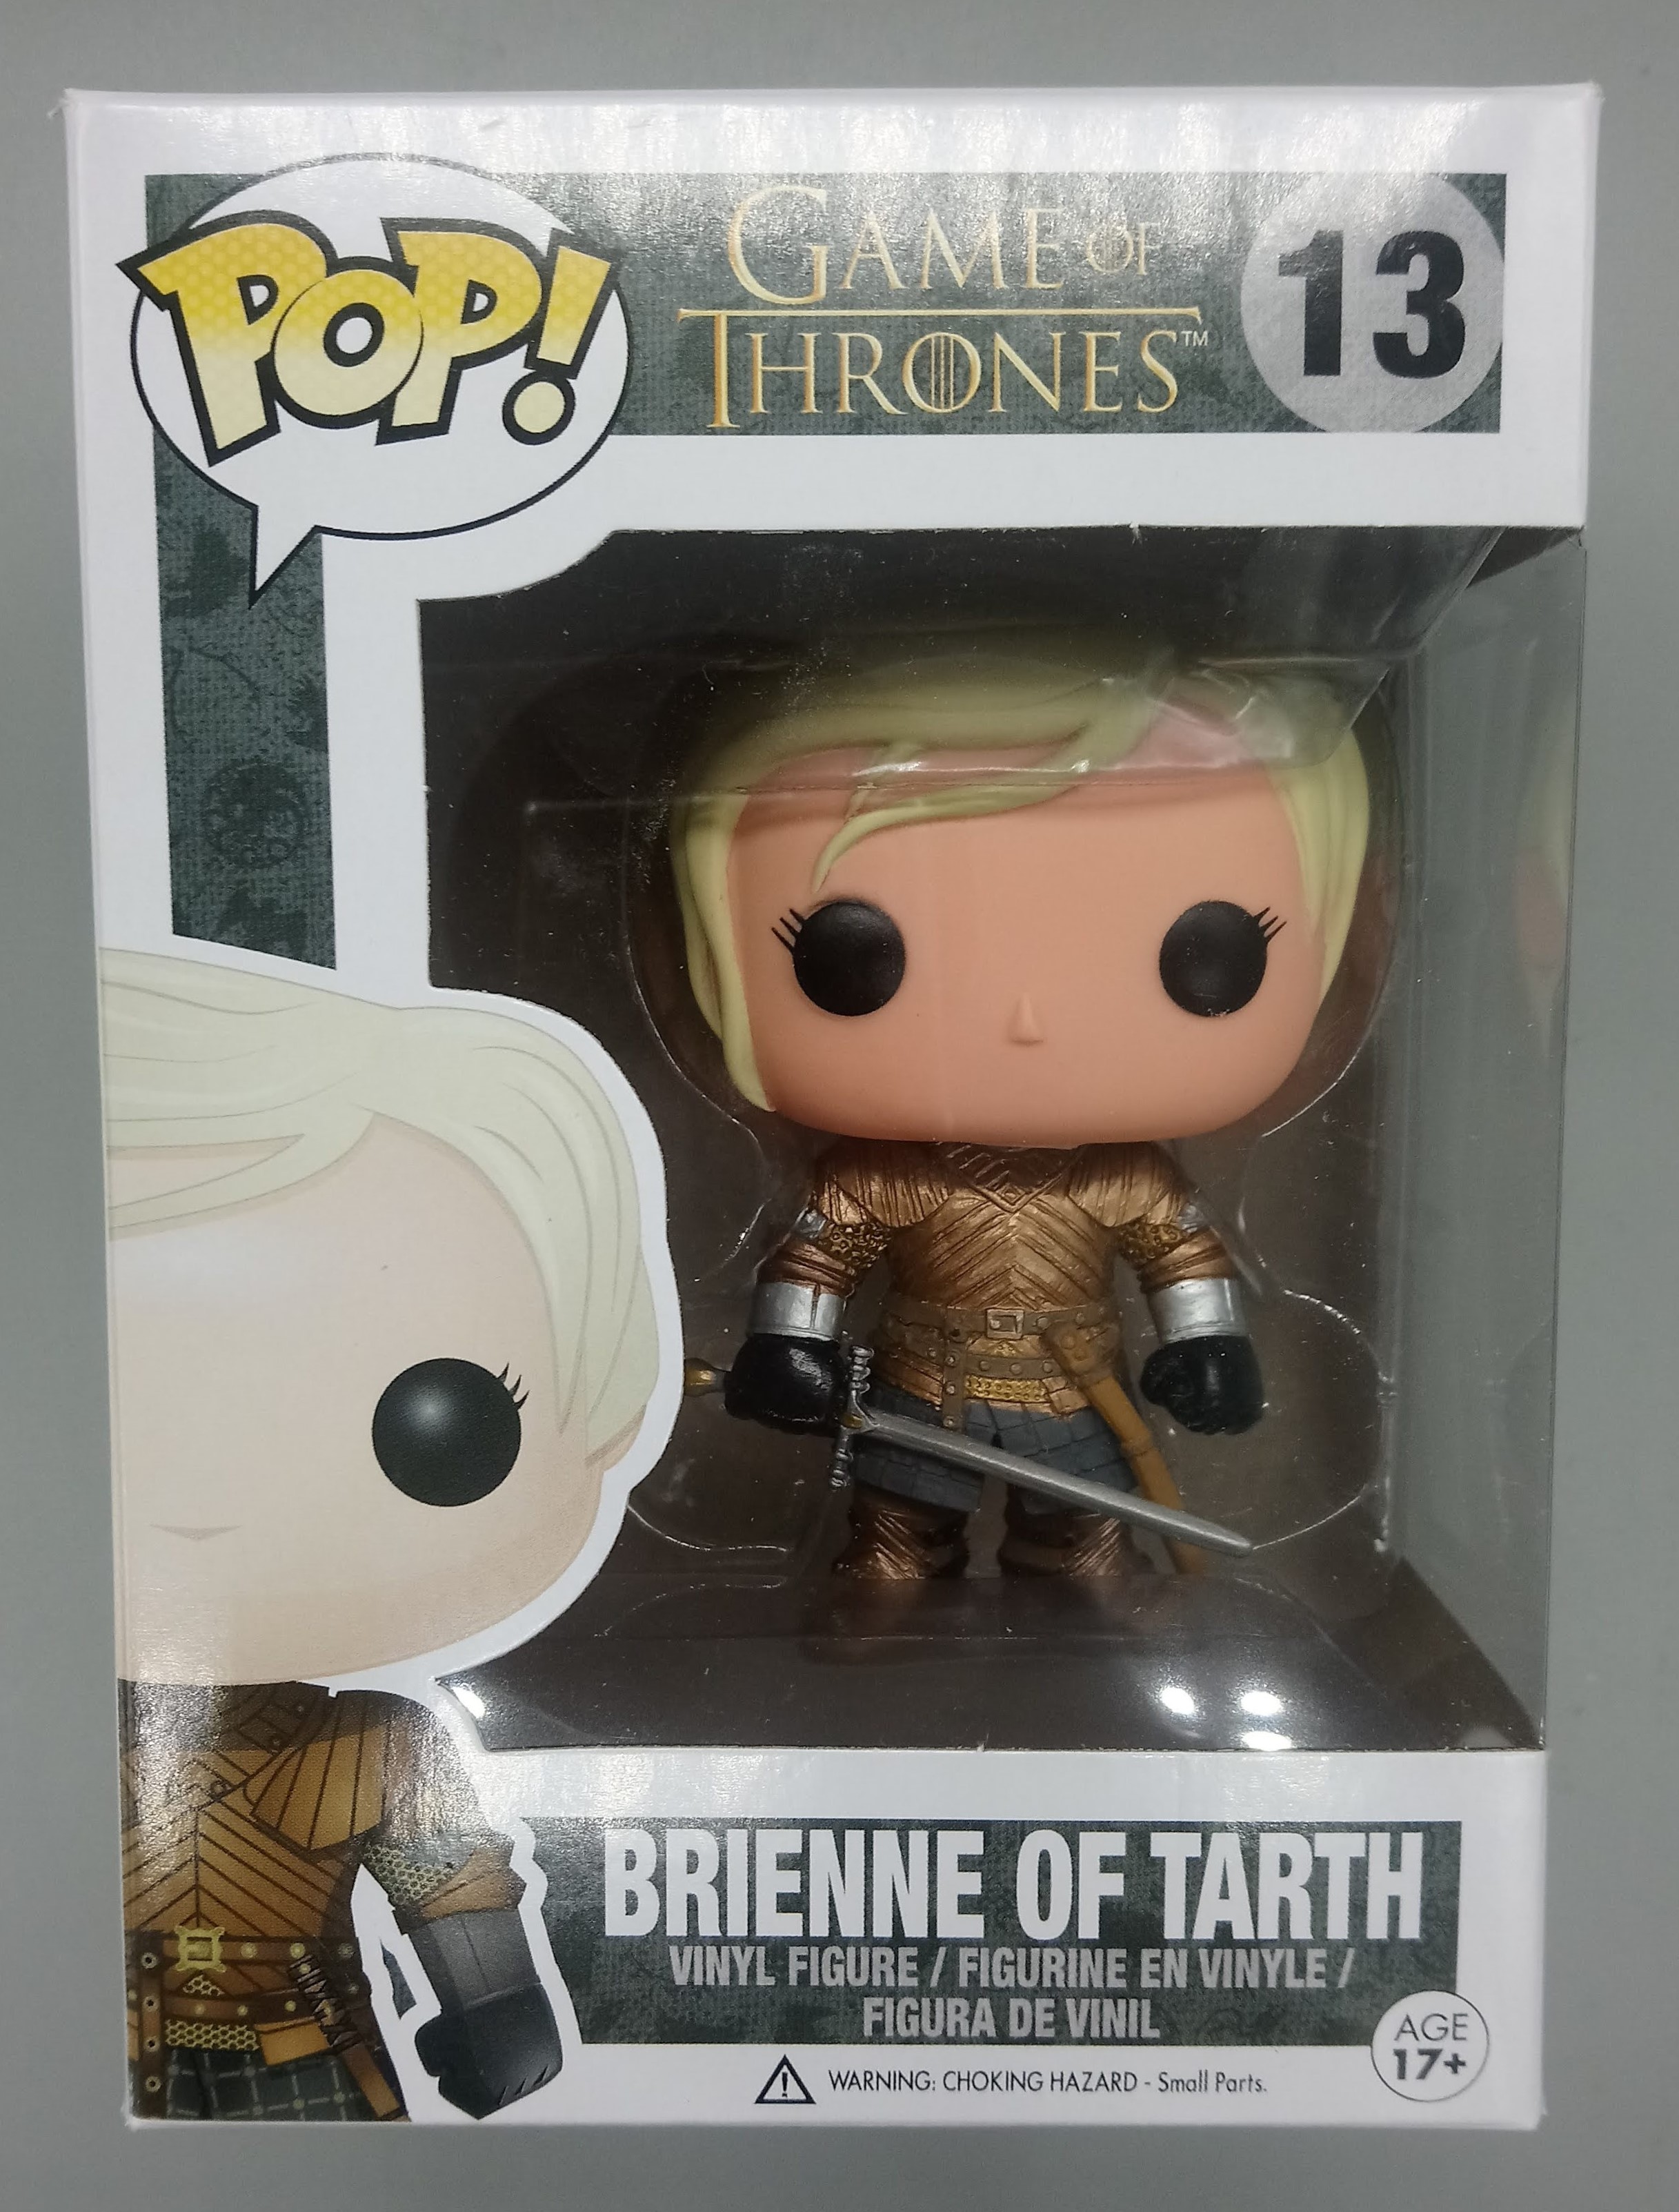 Kina Fjernelse chance 13 Brienne of Tarth - Game of Thrones – Funko Pops